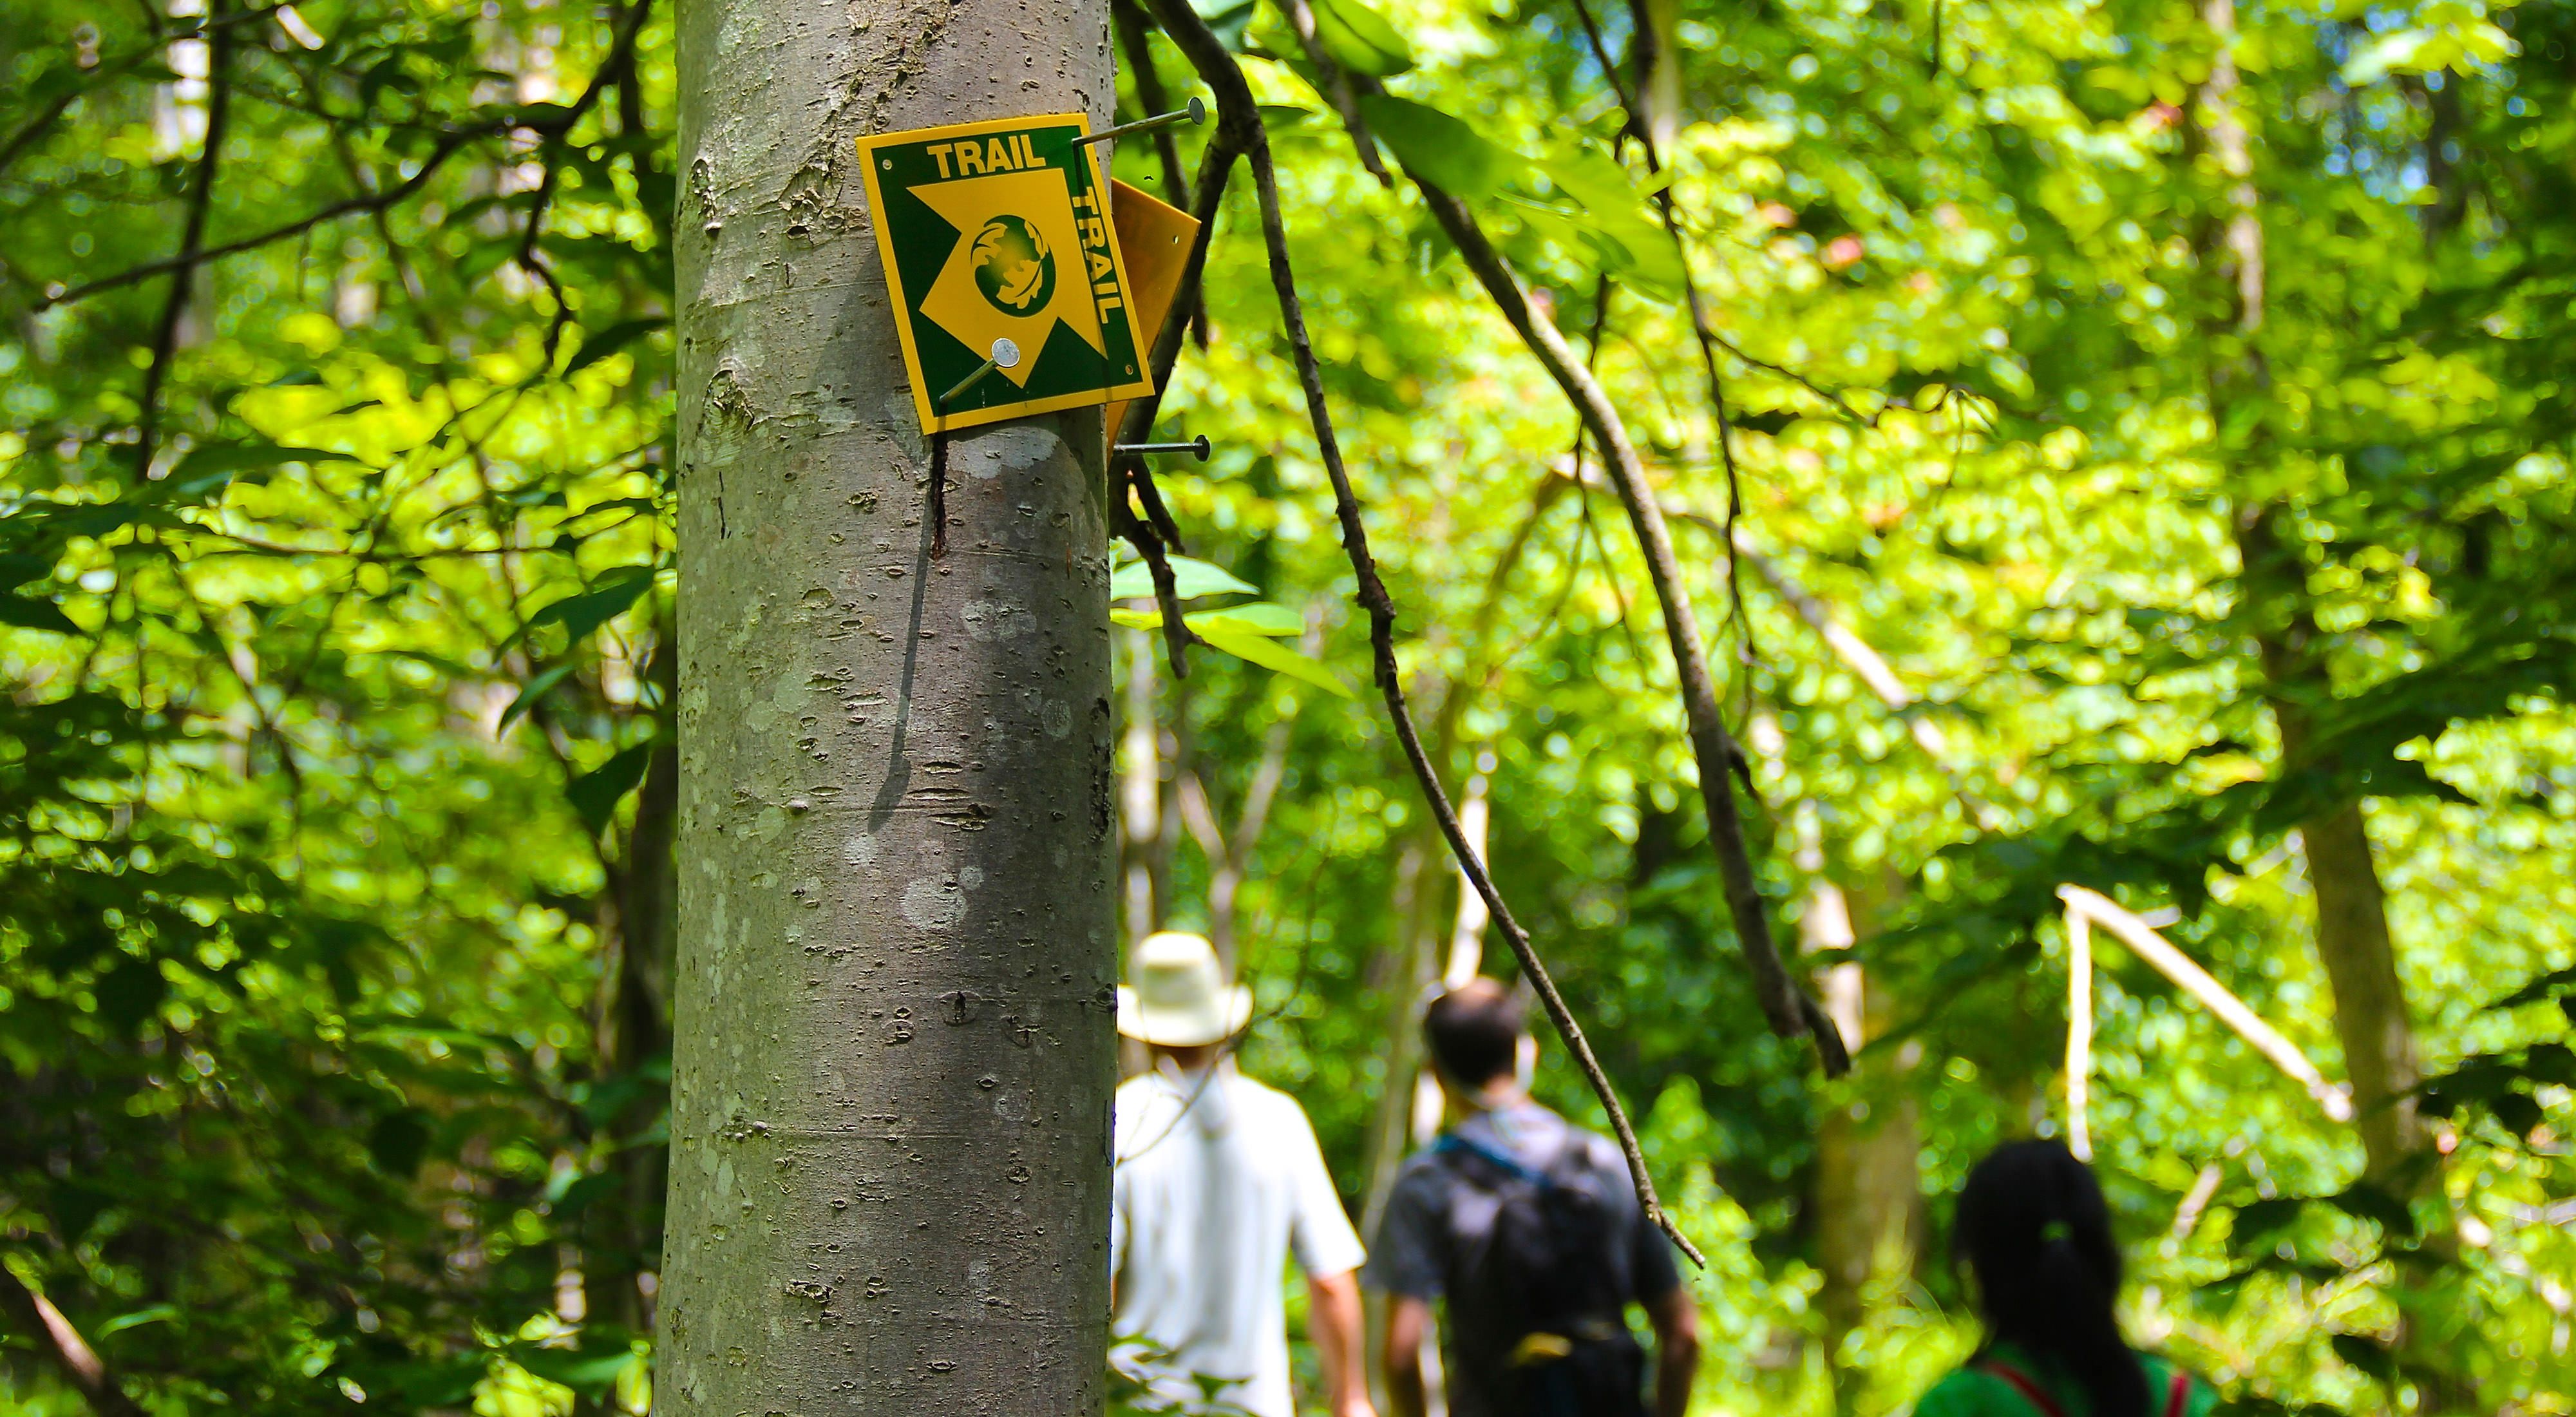 A yellow and green trail blaze is nailed to the trunk of a tree. Three people are walking along the forested trail in the background.